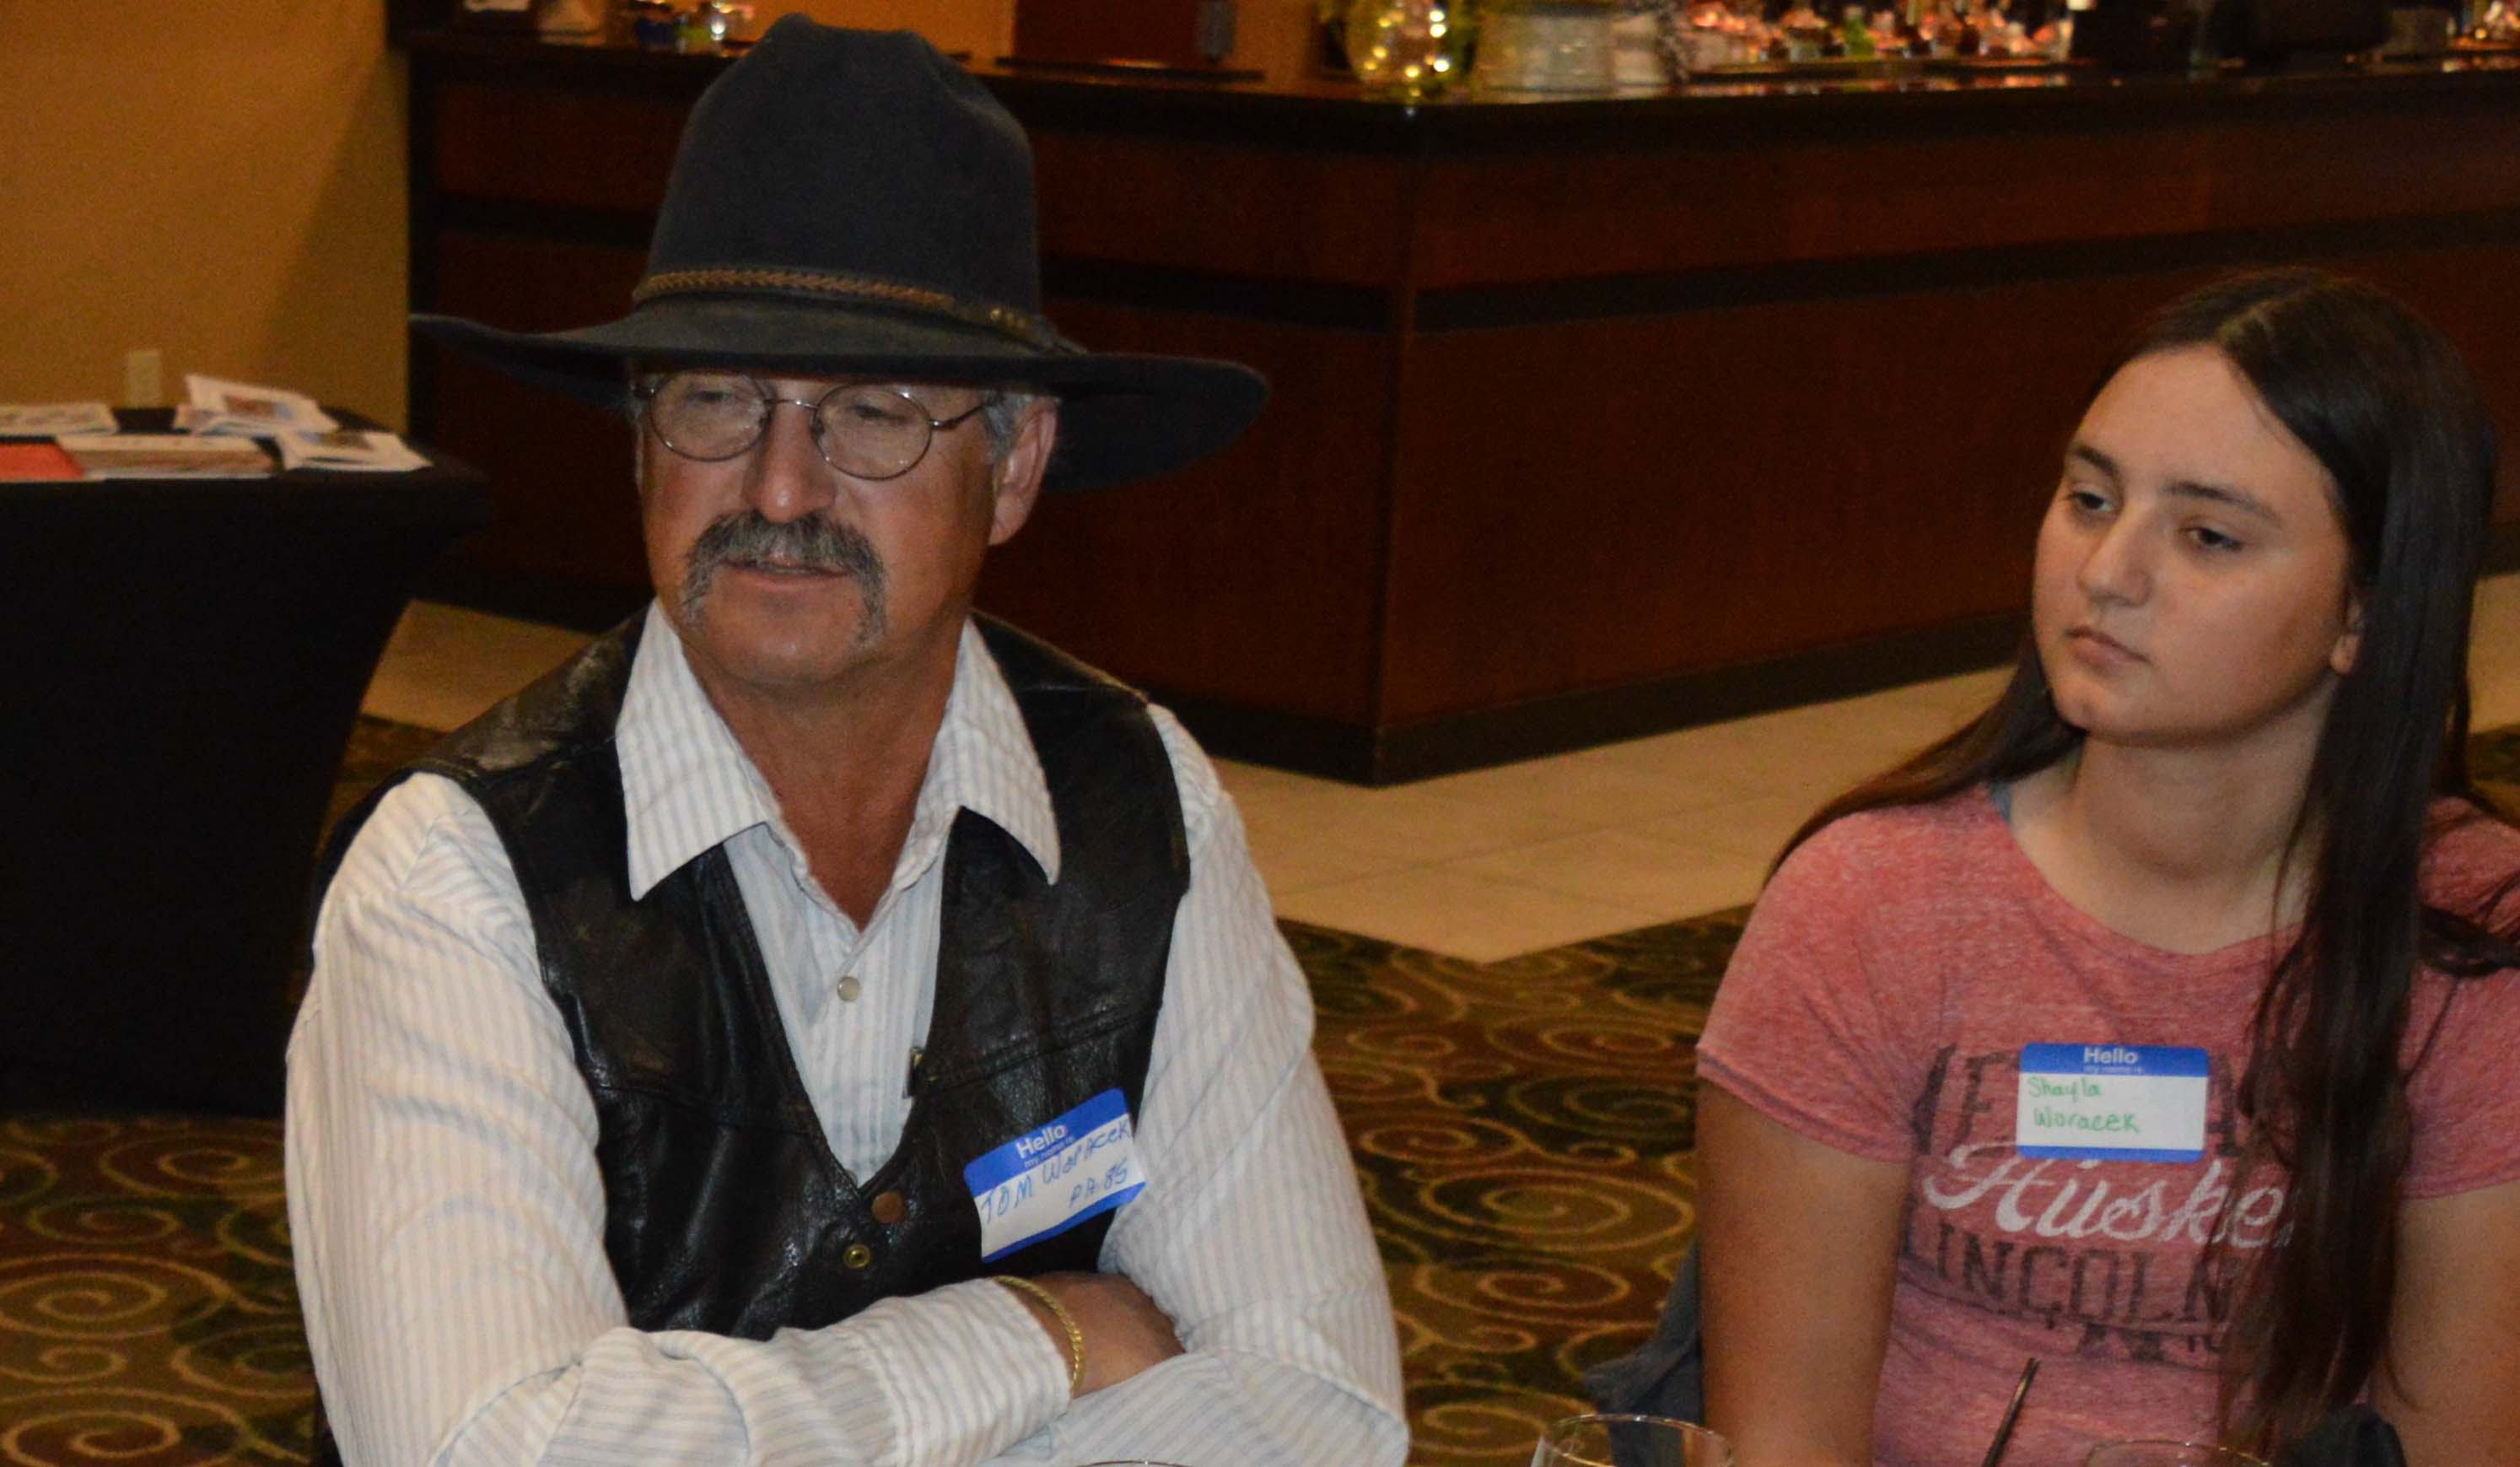 Thomas Woracek and his daughter, Shayla, of Maxwell, converse with friends at the 2019 reunion and banquet of the Aggie Alumni Association. Shayla, the Class of 2019 valedictorian, received an alumni scholarship last year. Thomas graduated production agriculture, '85. Applications for 2019-2020 are due September 6.